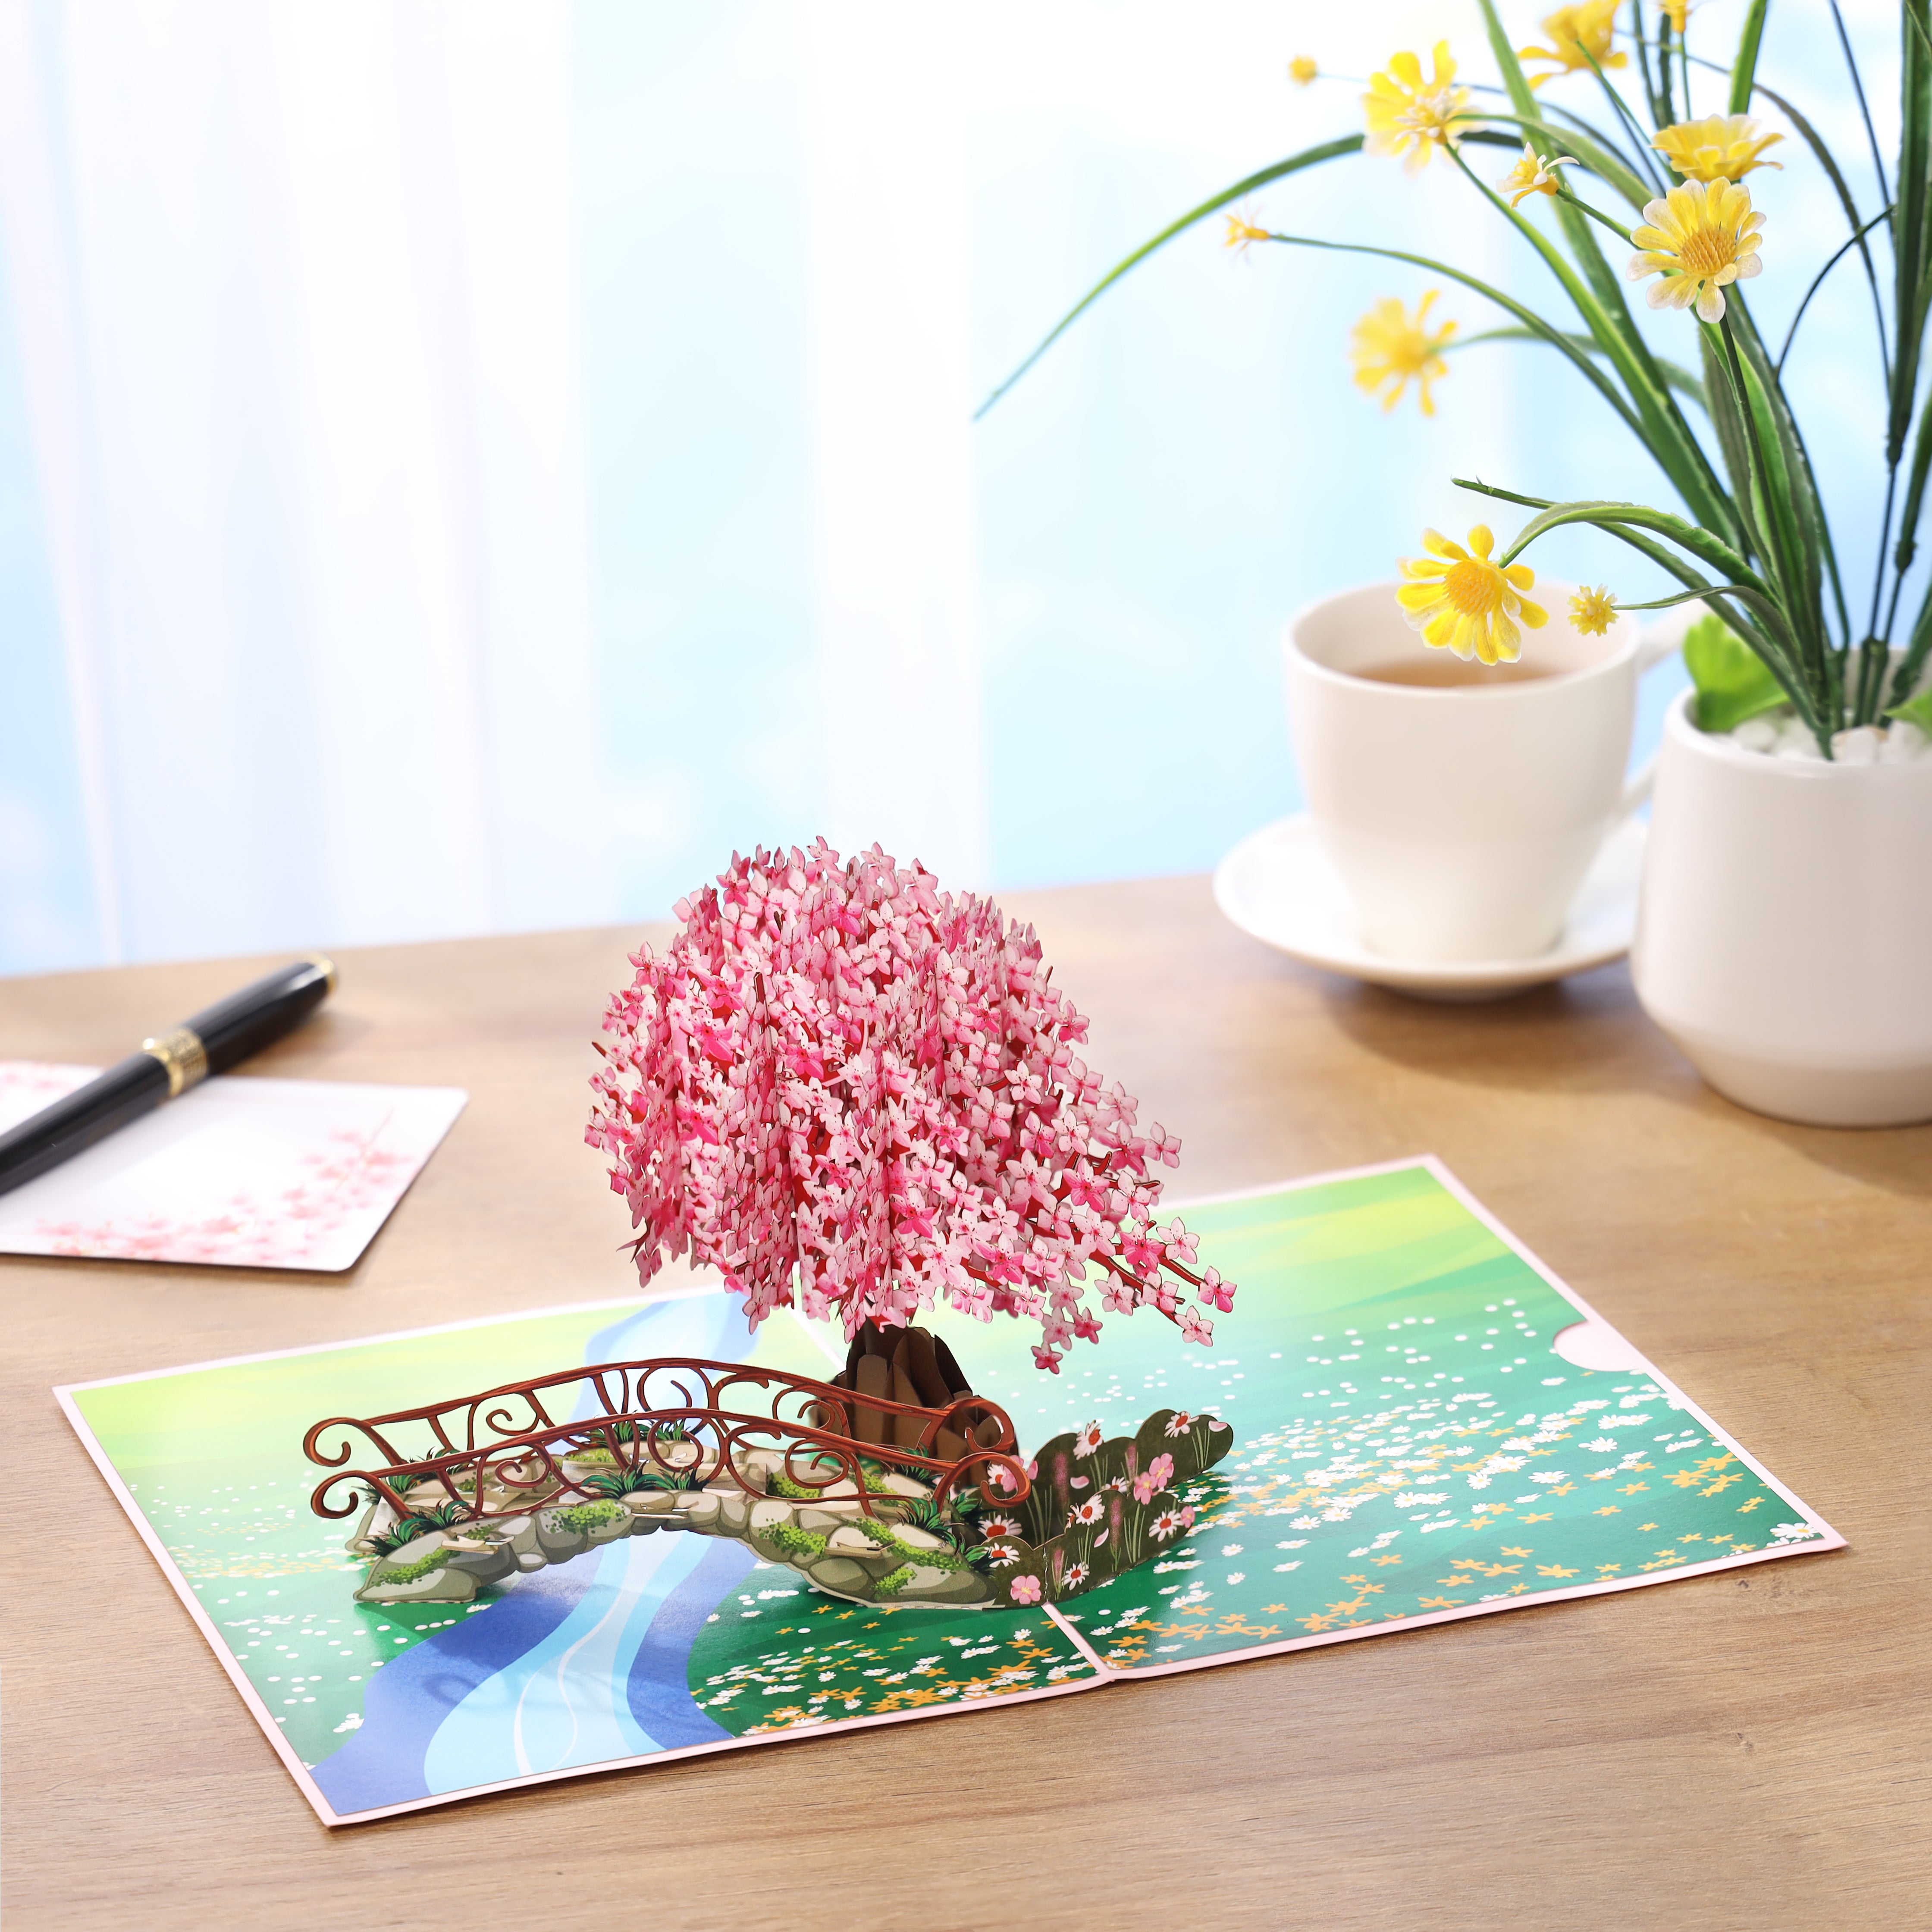 Cherry blossom tree 3D romantic love For Birthday cards, anniversary greeting card, pop up Mothers Day card